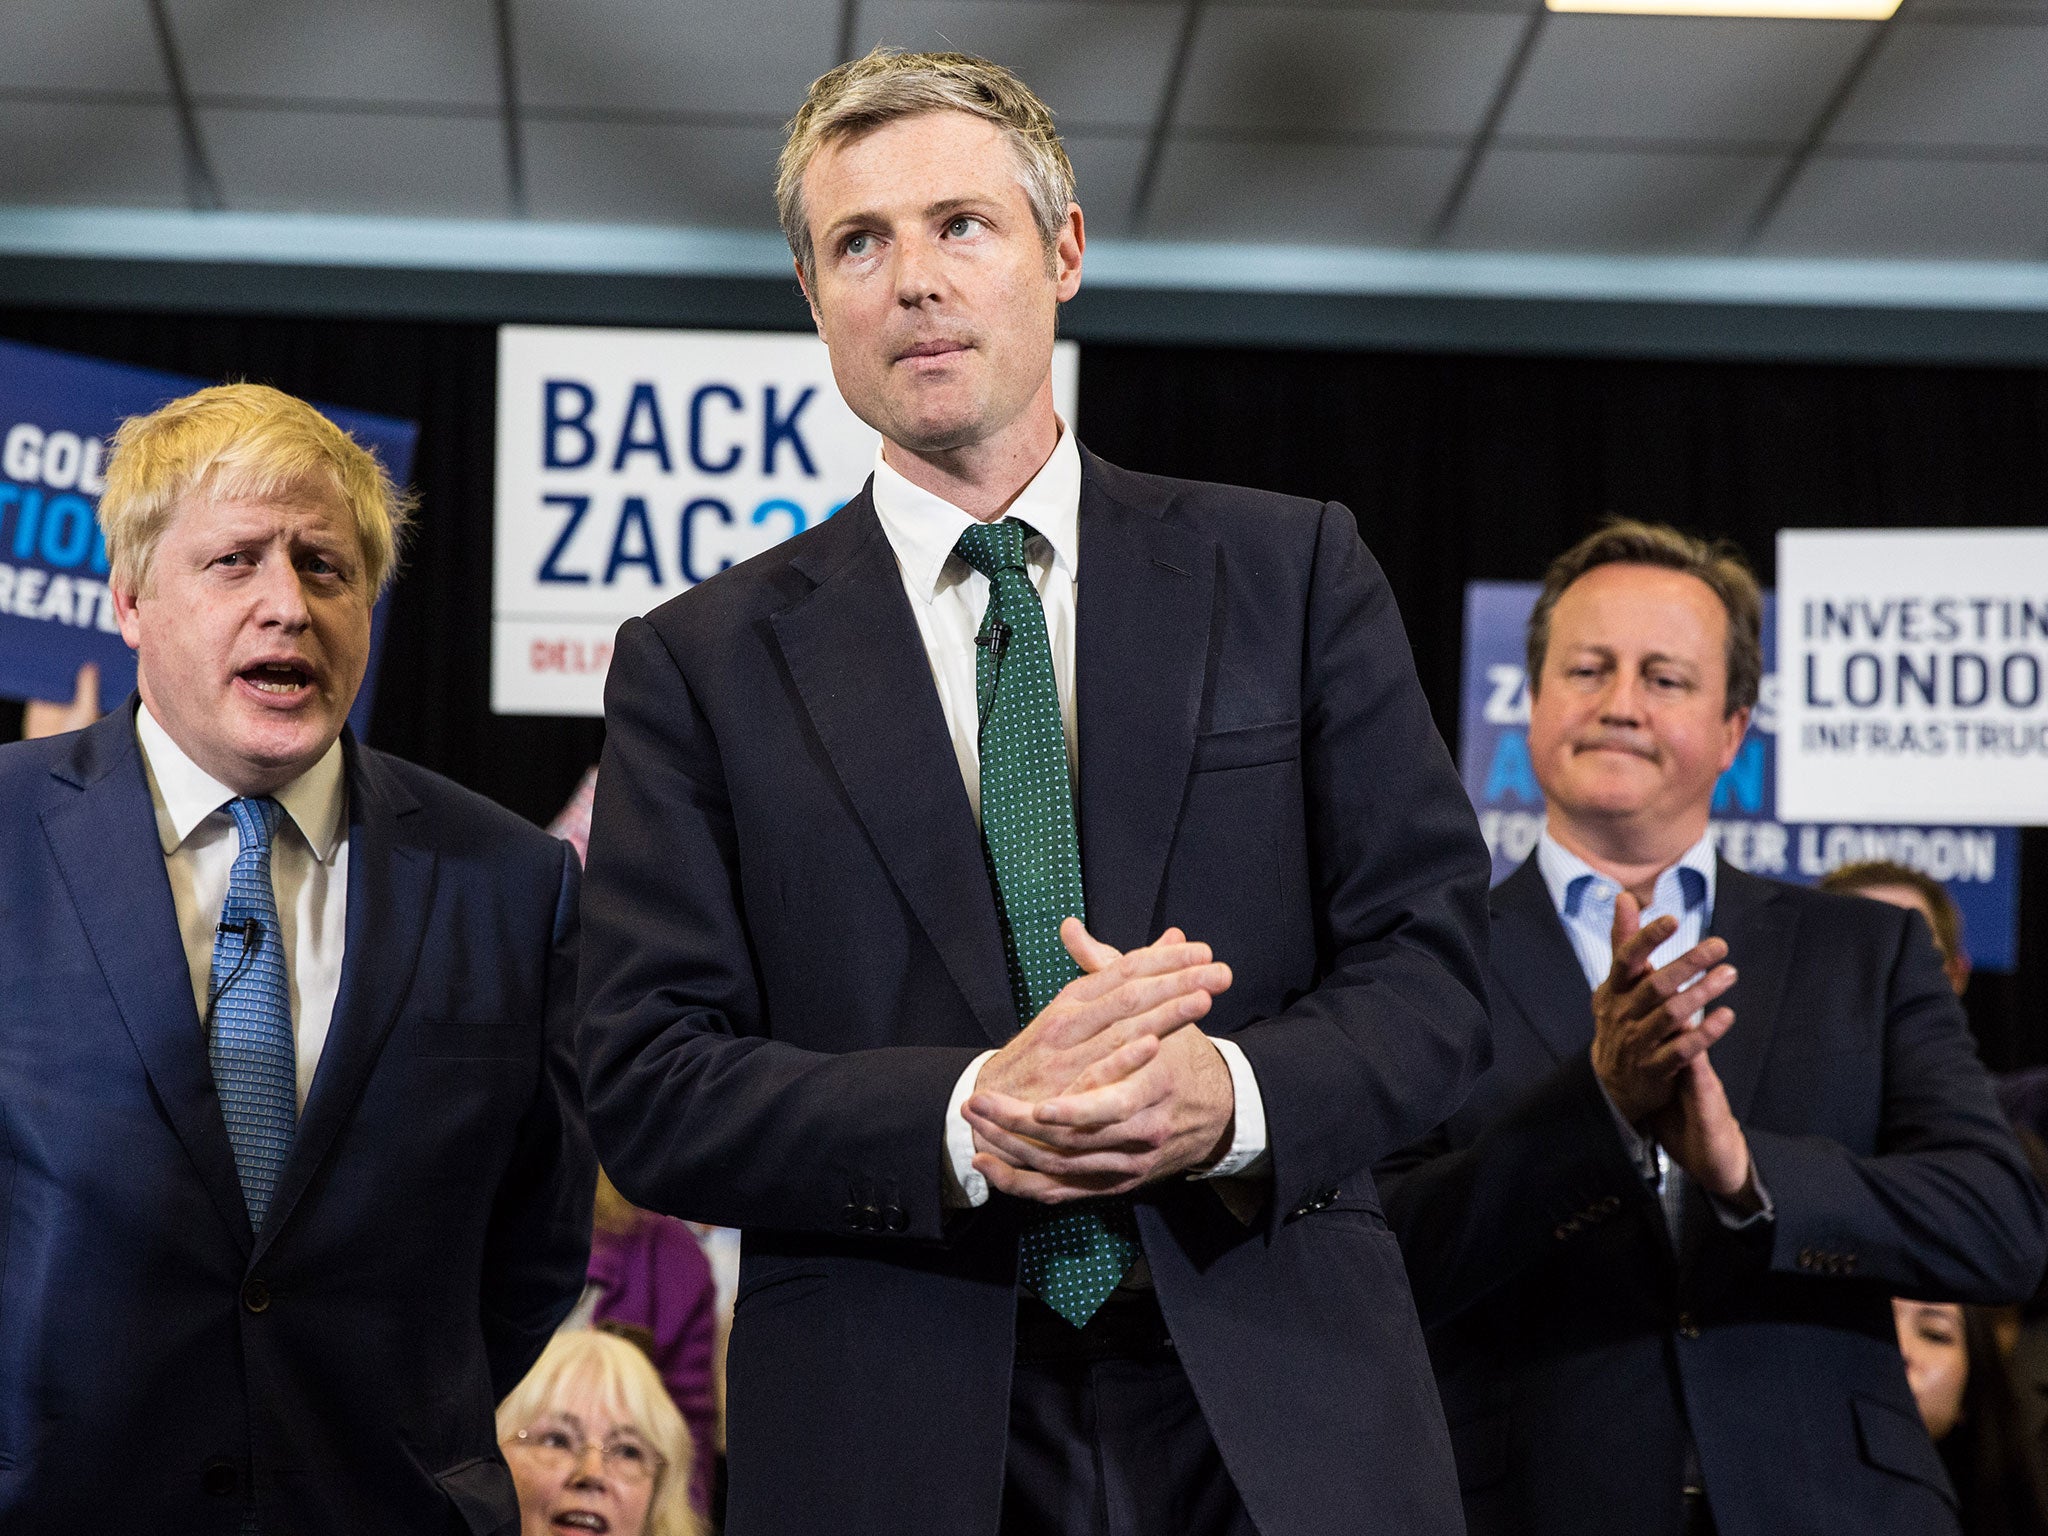 The former London mayoral candidate says his ‘position is the same as it was nine years ago’